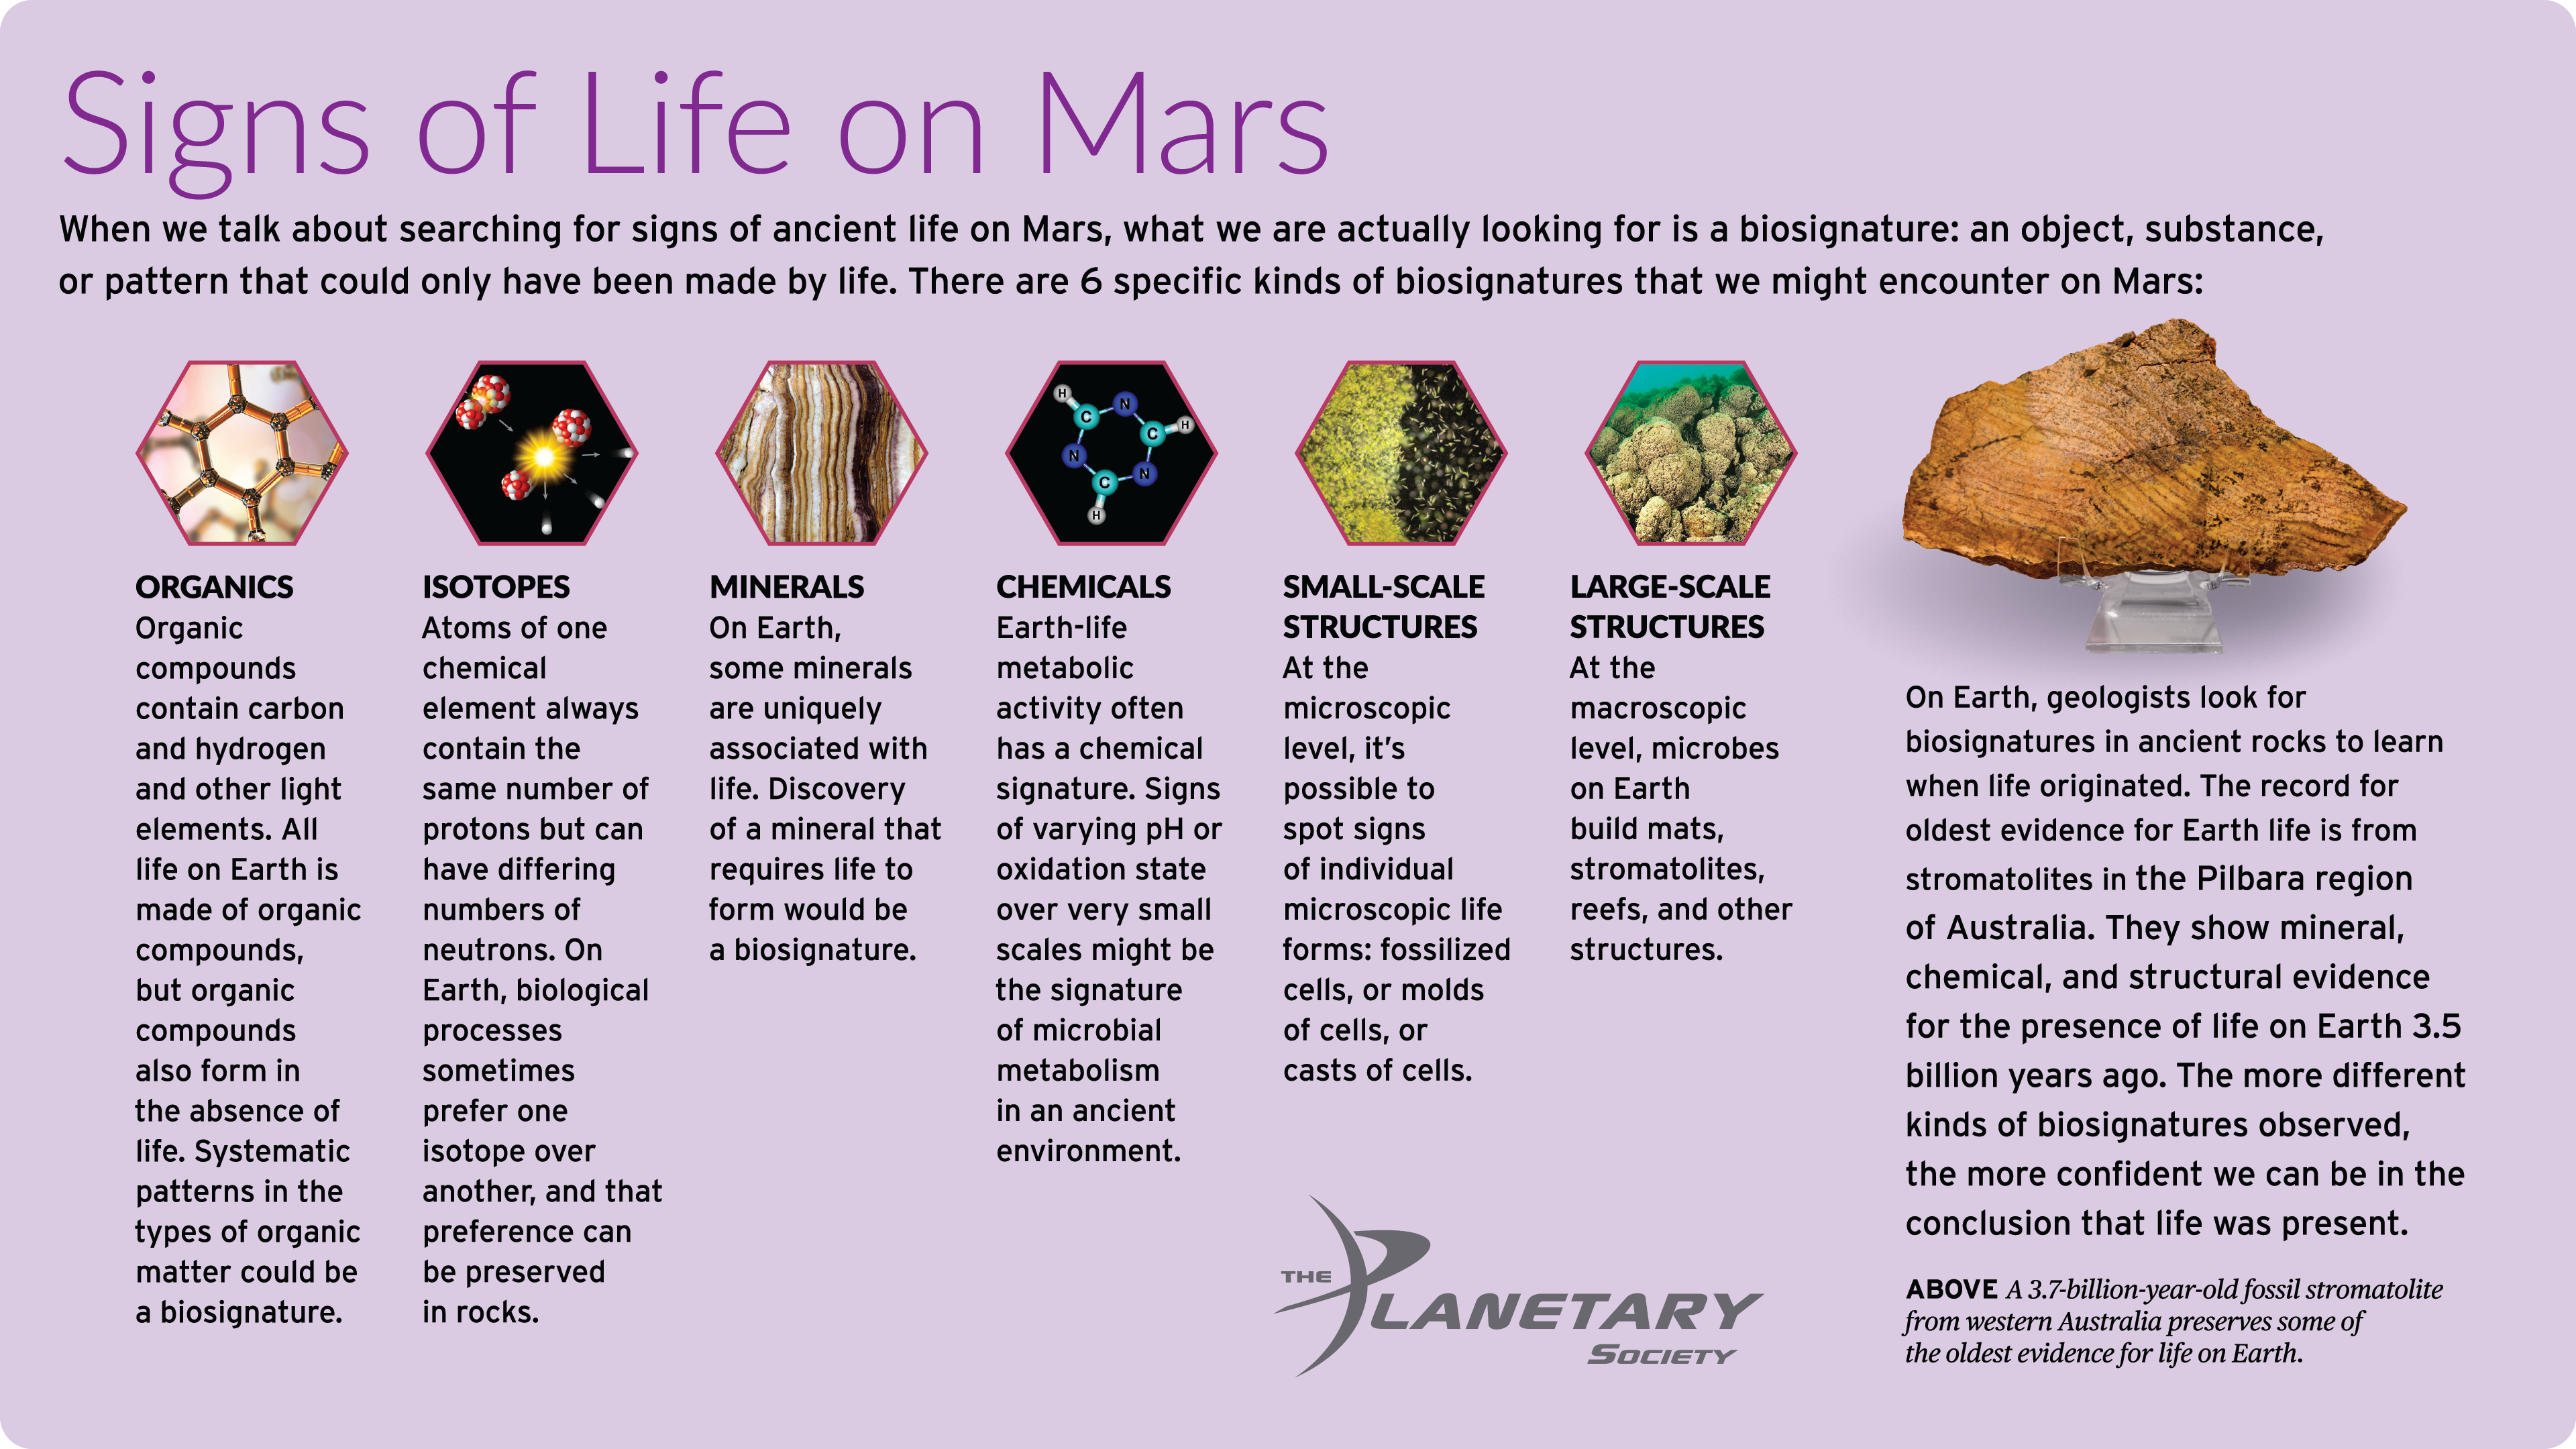 is there life on mars essay